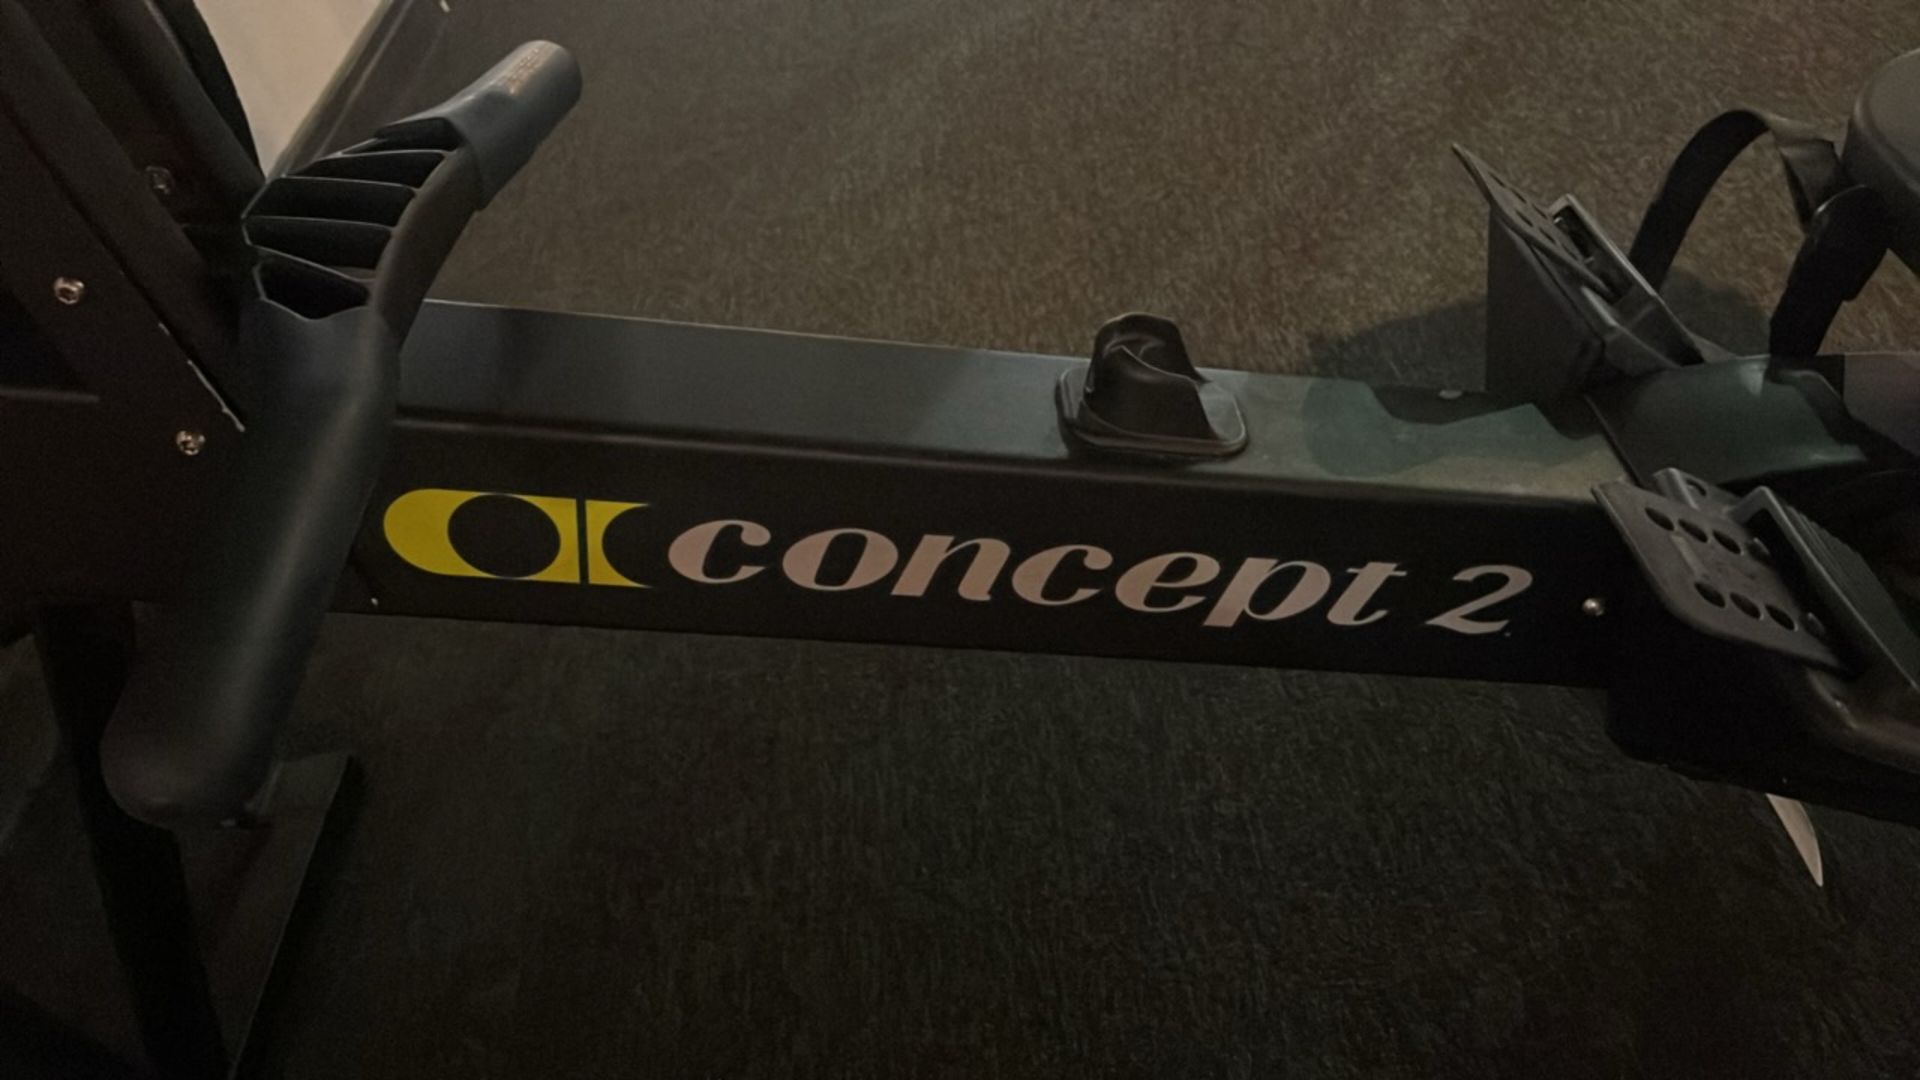 Concept 2 Rower - Image 4 of 9